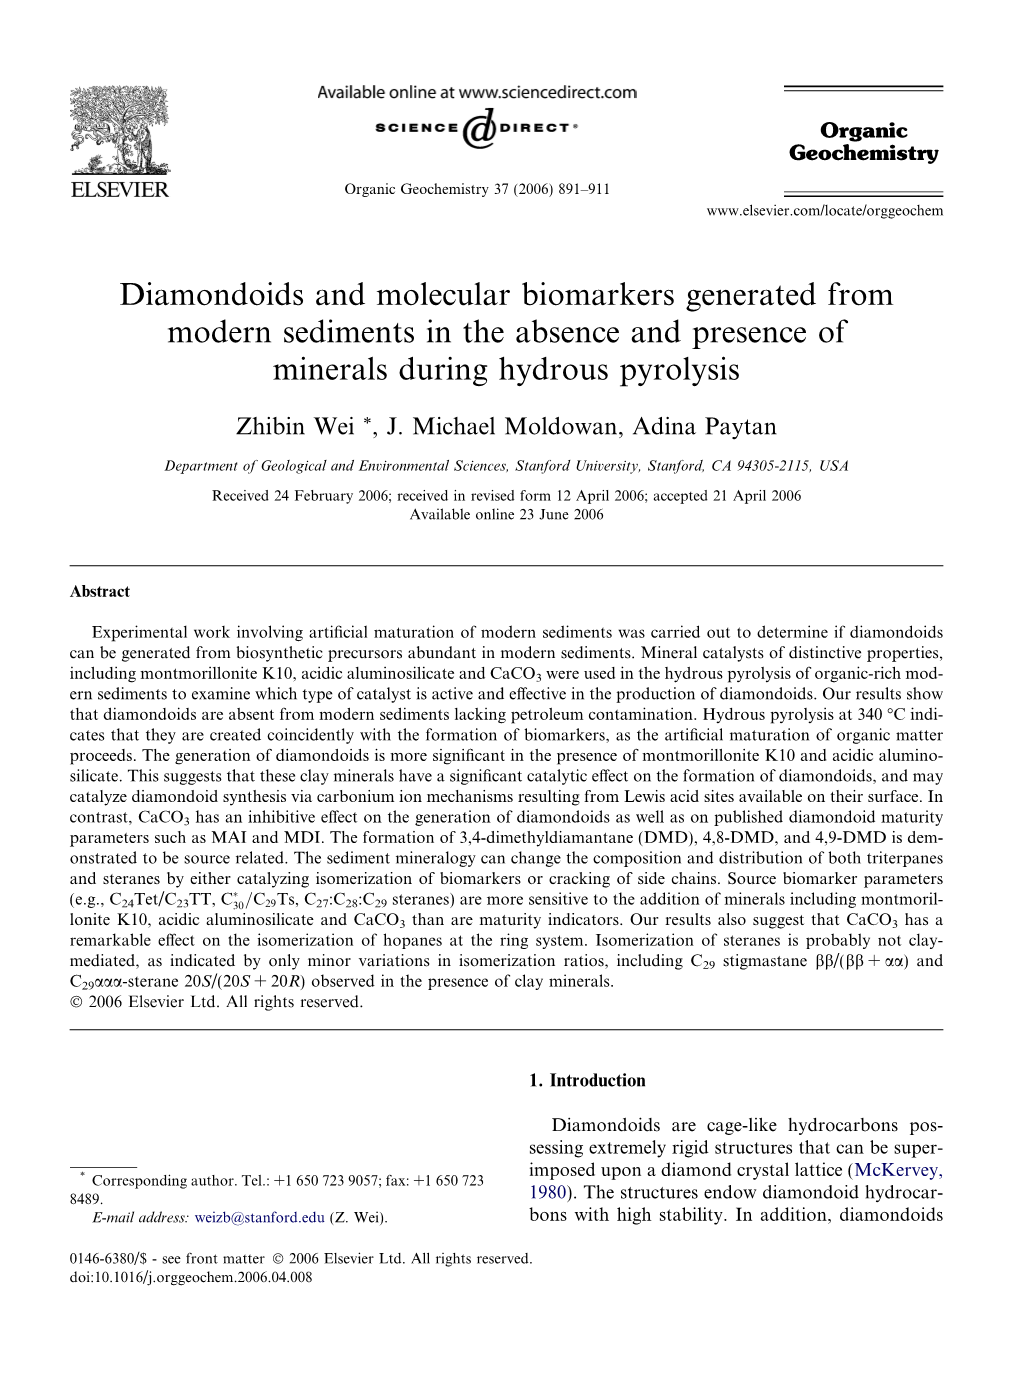 Diamondoids and Molecular Biomarkers Generated from Modern Sediments in the Absence and Presence of Minerals During Hydrous Pyrolysis